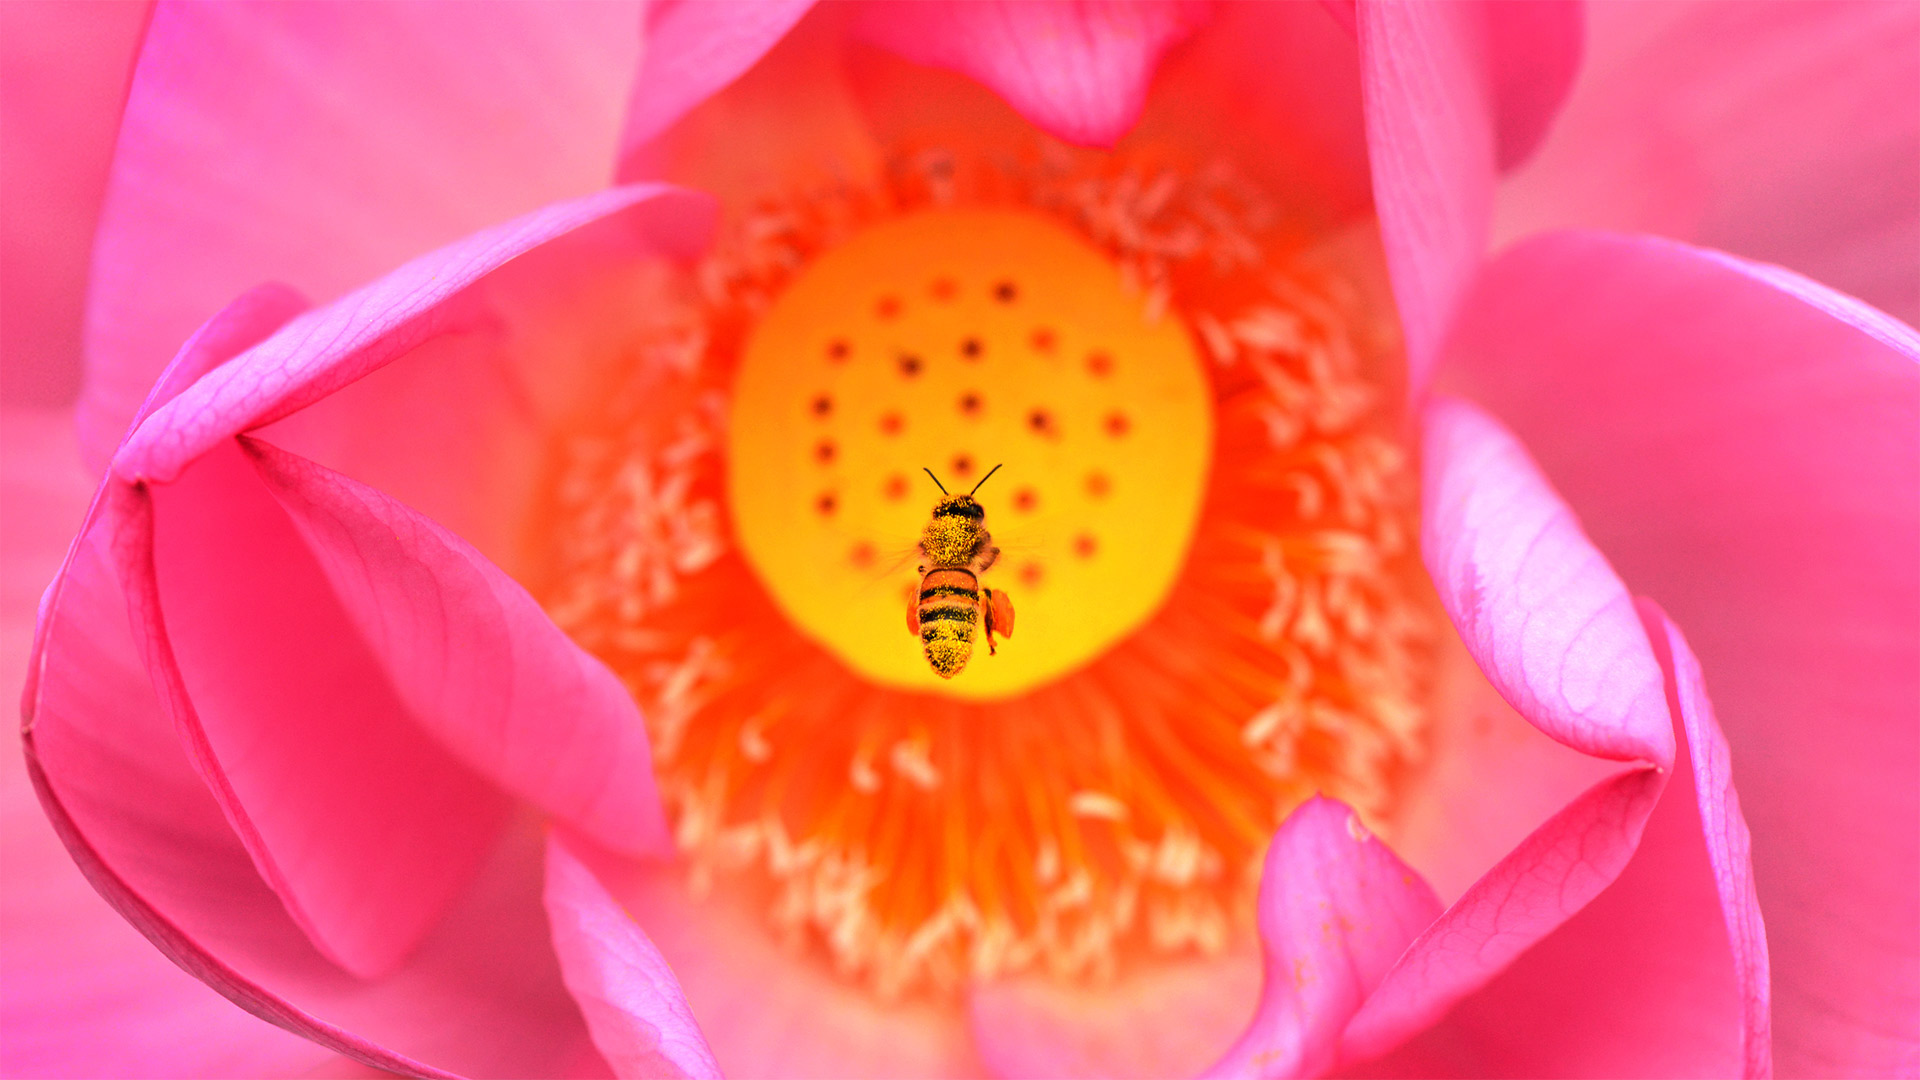 A bee dives into a lotus flower at Kenilworth Park and Aquatic Gardens in Washington, DC - Linda Davidson/The Washington Post via Getty Images)